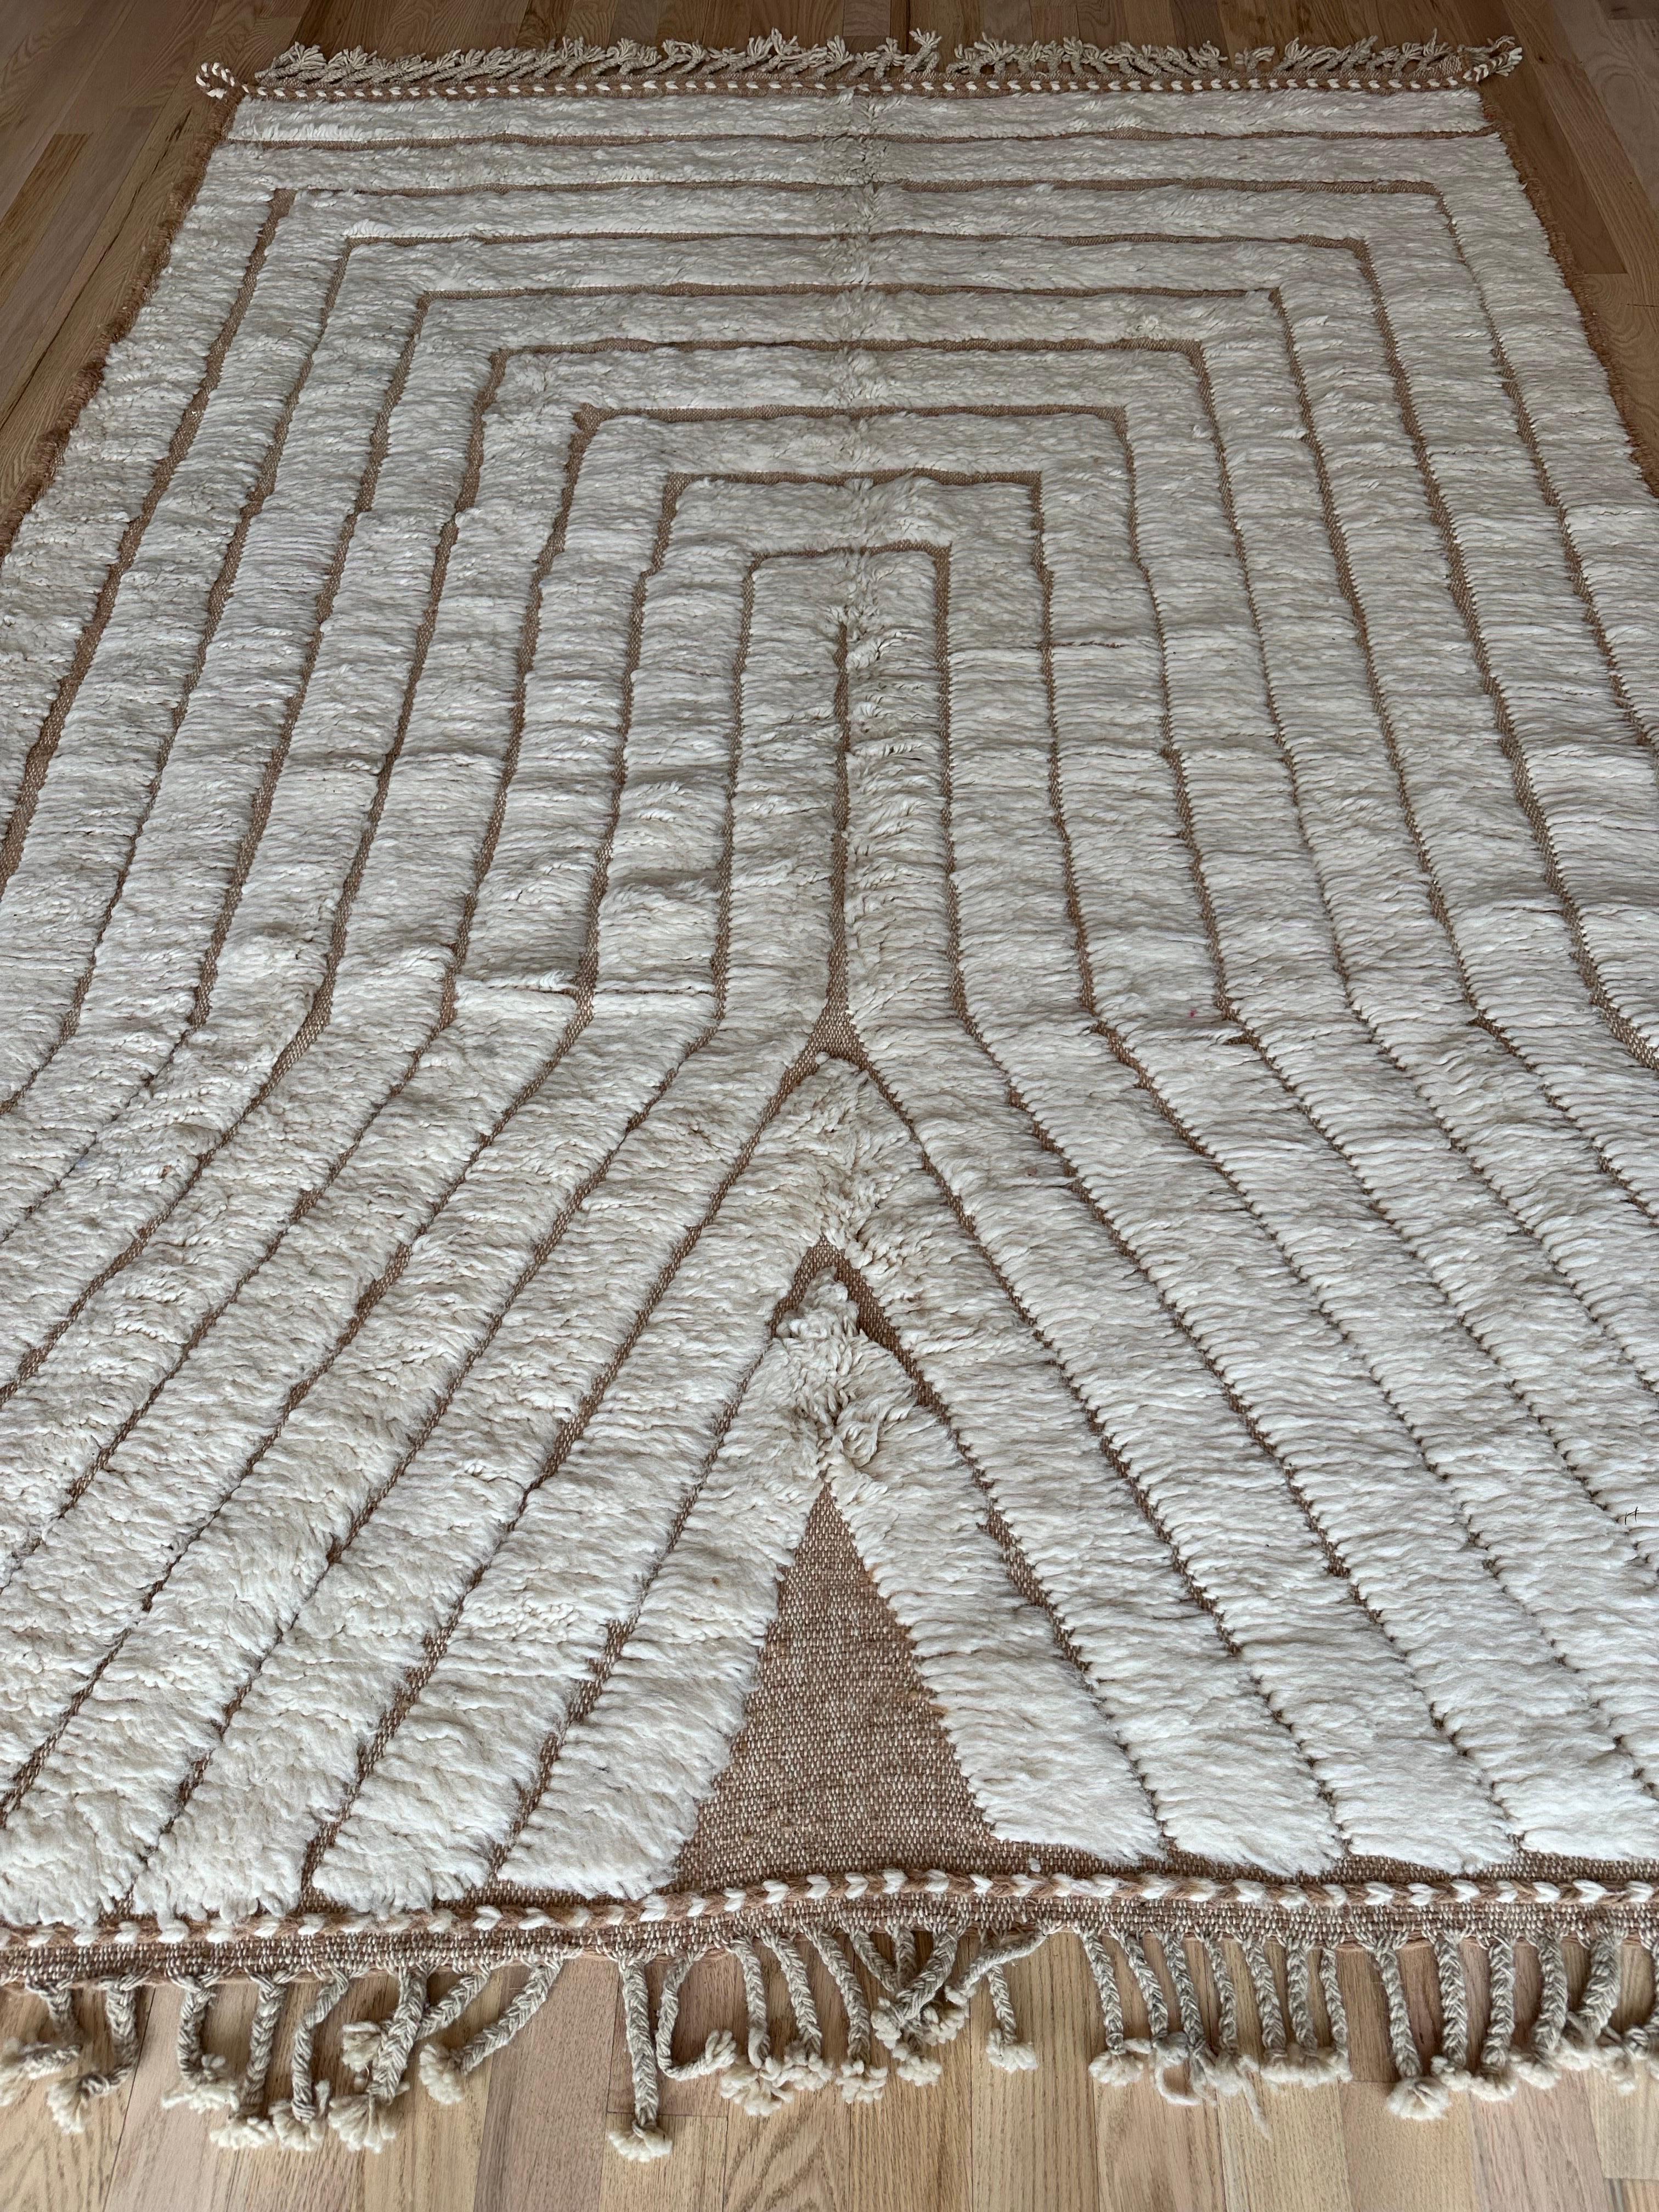 Vintage Moroccan Rug by Berber Tribes of Morocco, cream color, off white, tan For Sale 1